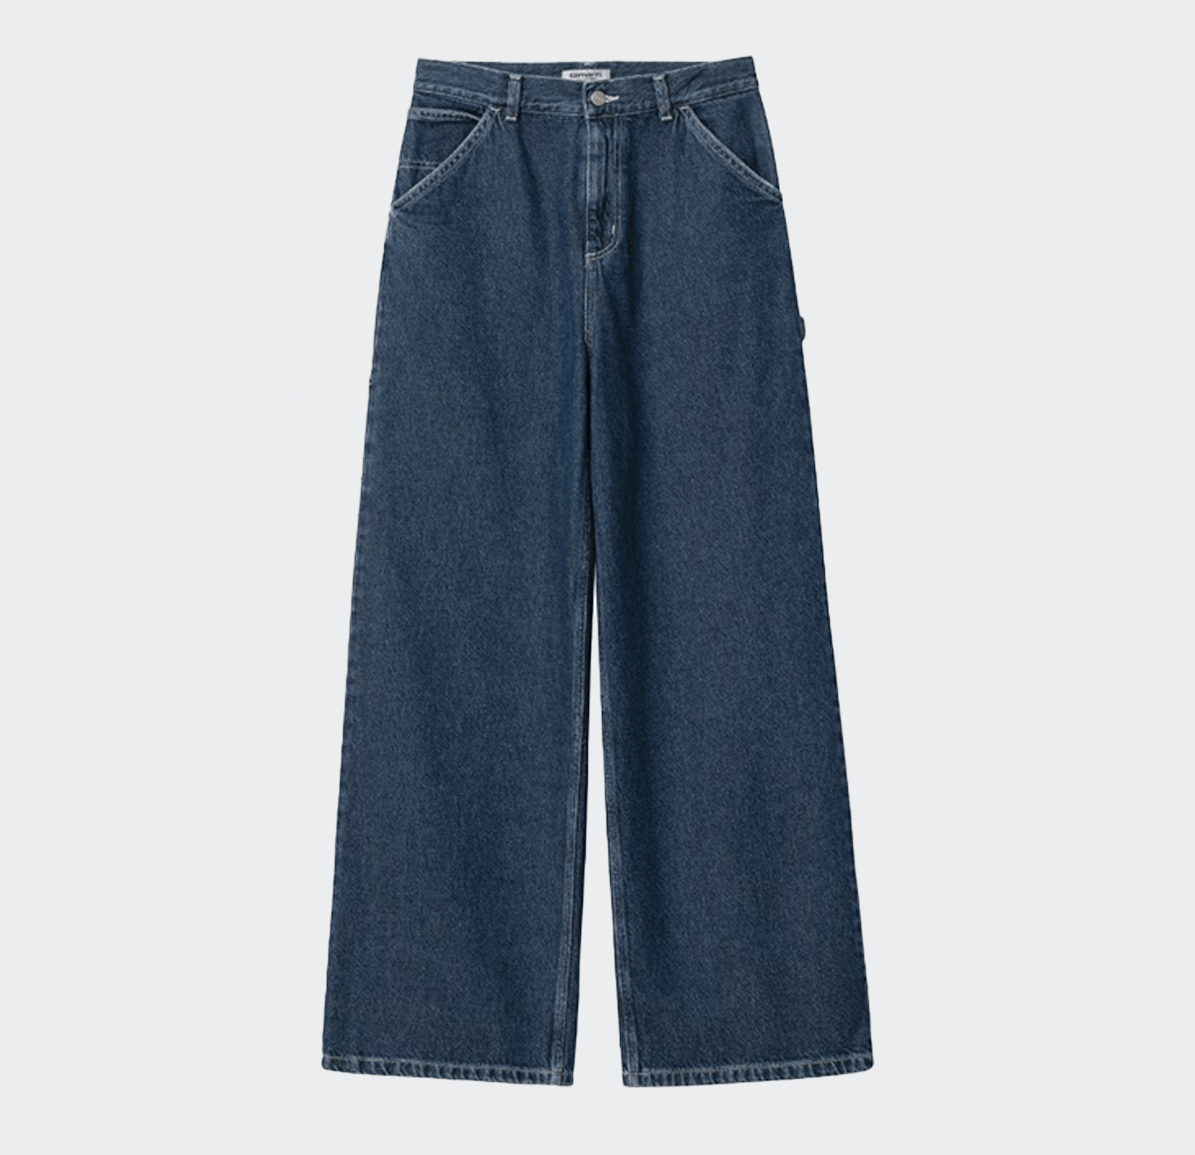 Carhartt WIP Jens Womens Pant - Blue Stone Washed - Carhartt WIP - State Of Play